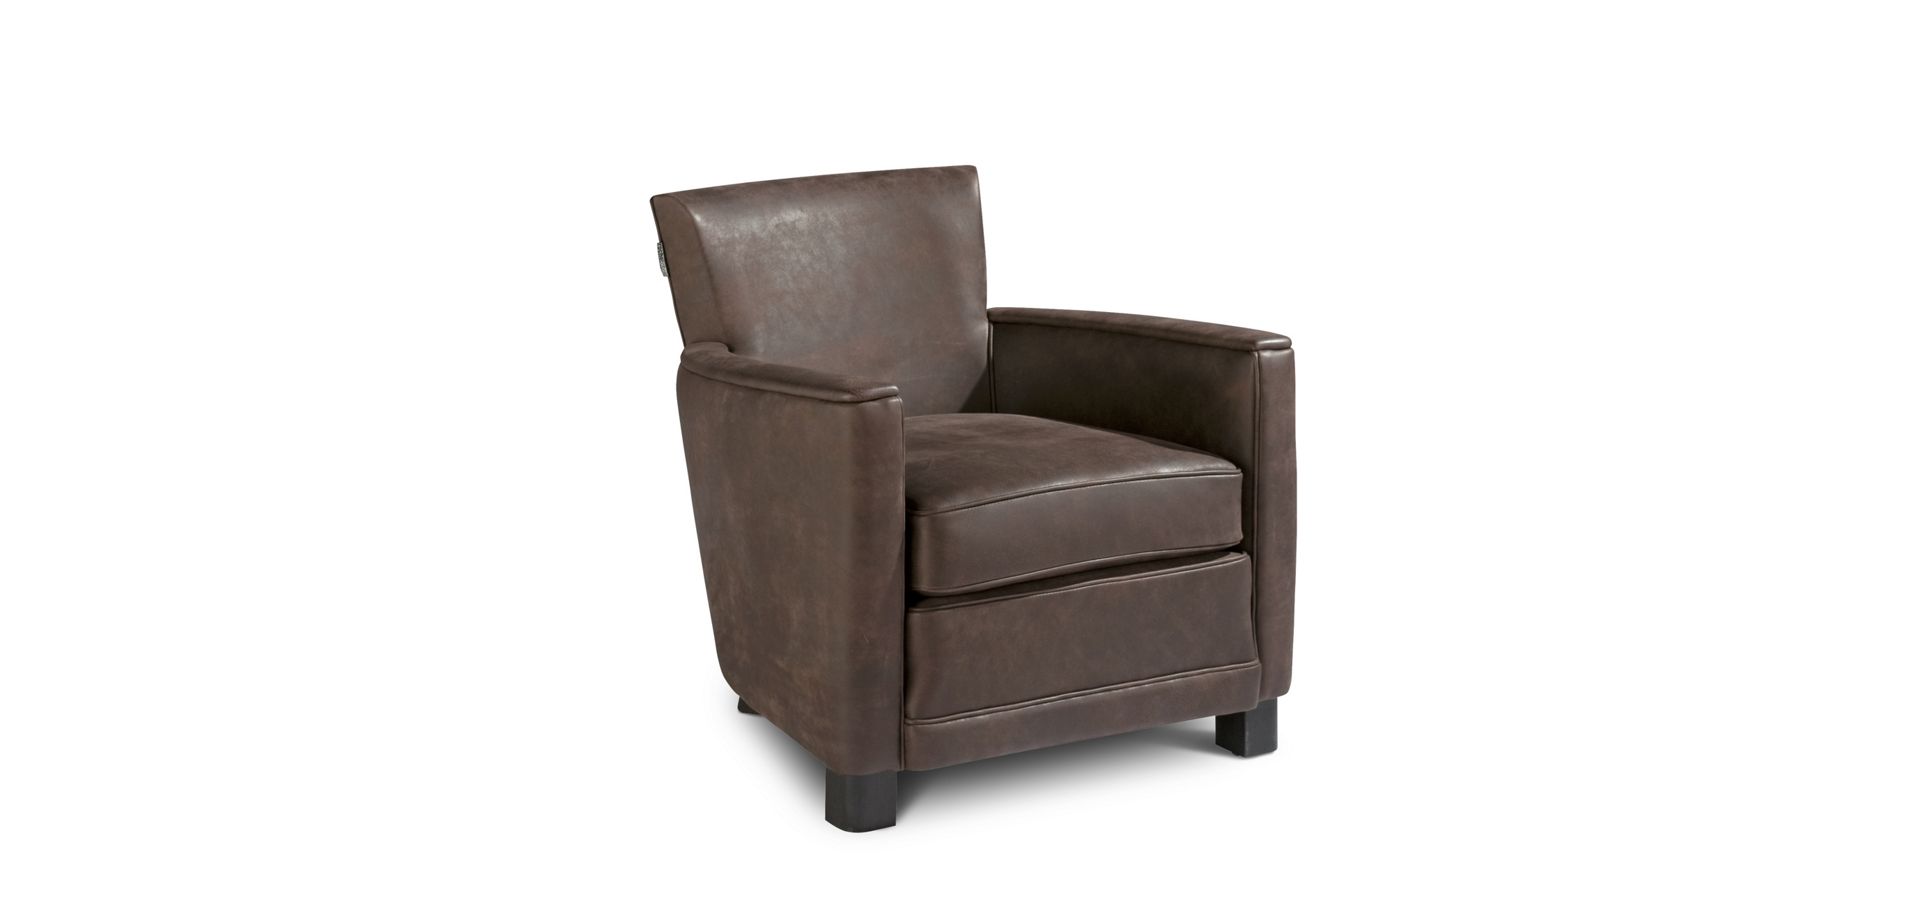 armchair image number 2